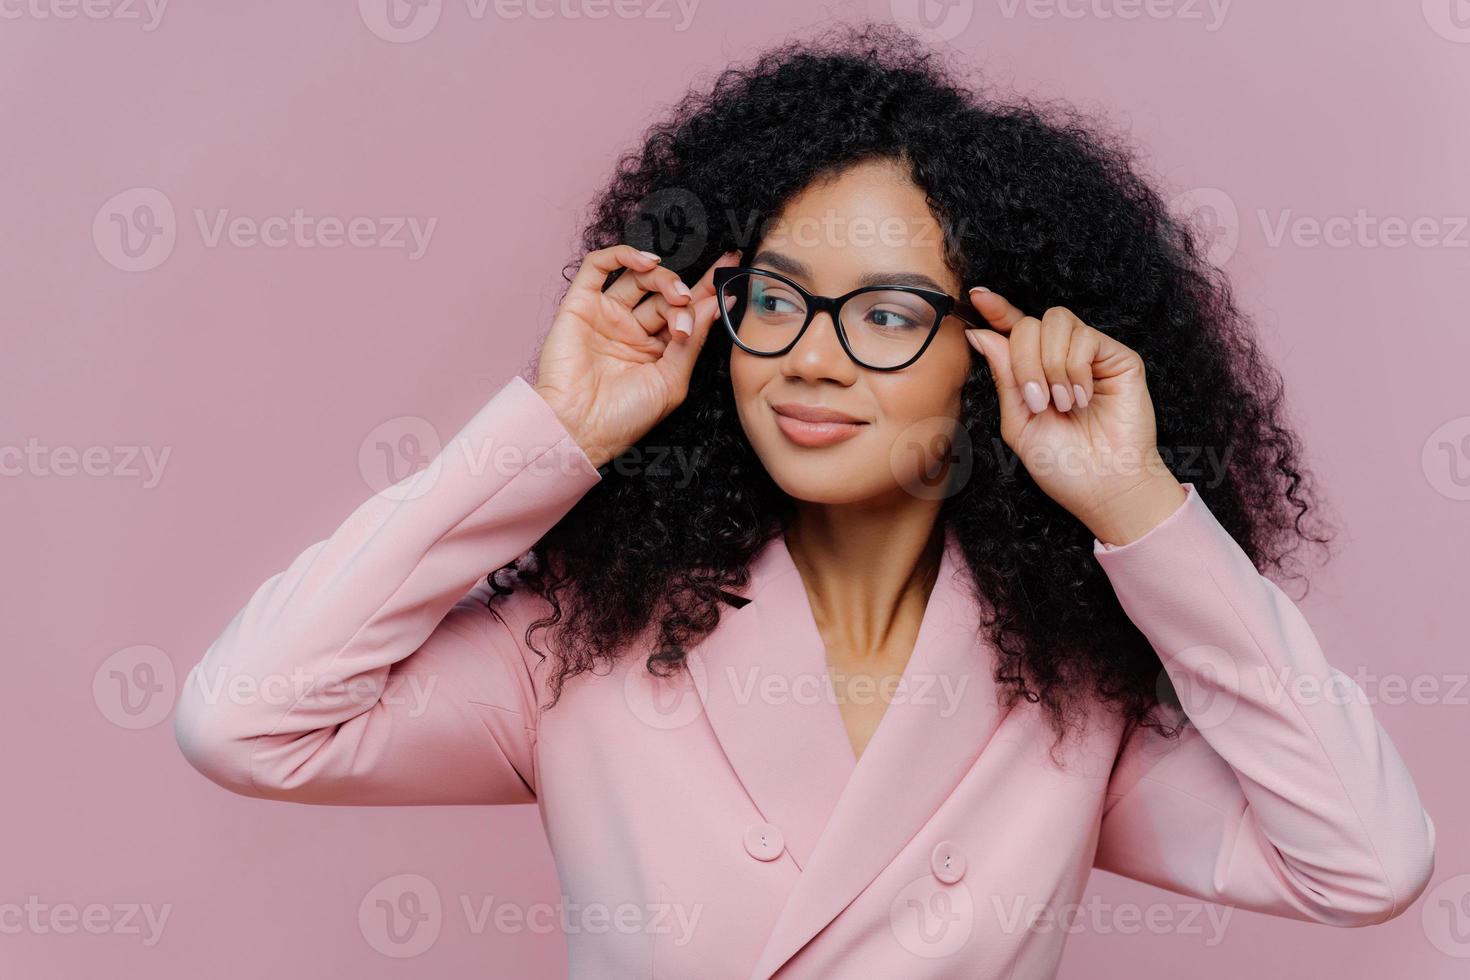 Headshot of attentive female boss keeps hands on frame of glasses, looks pensively away, wears rosy formal suit, has curly Afro hairstyle, poses against purple background. People, business, ethnicty photo